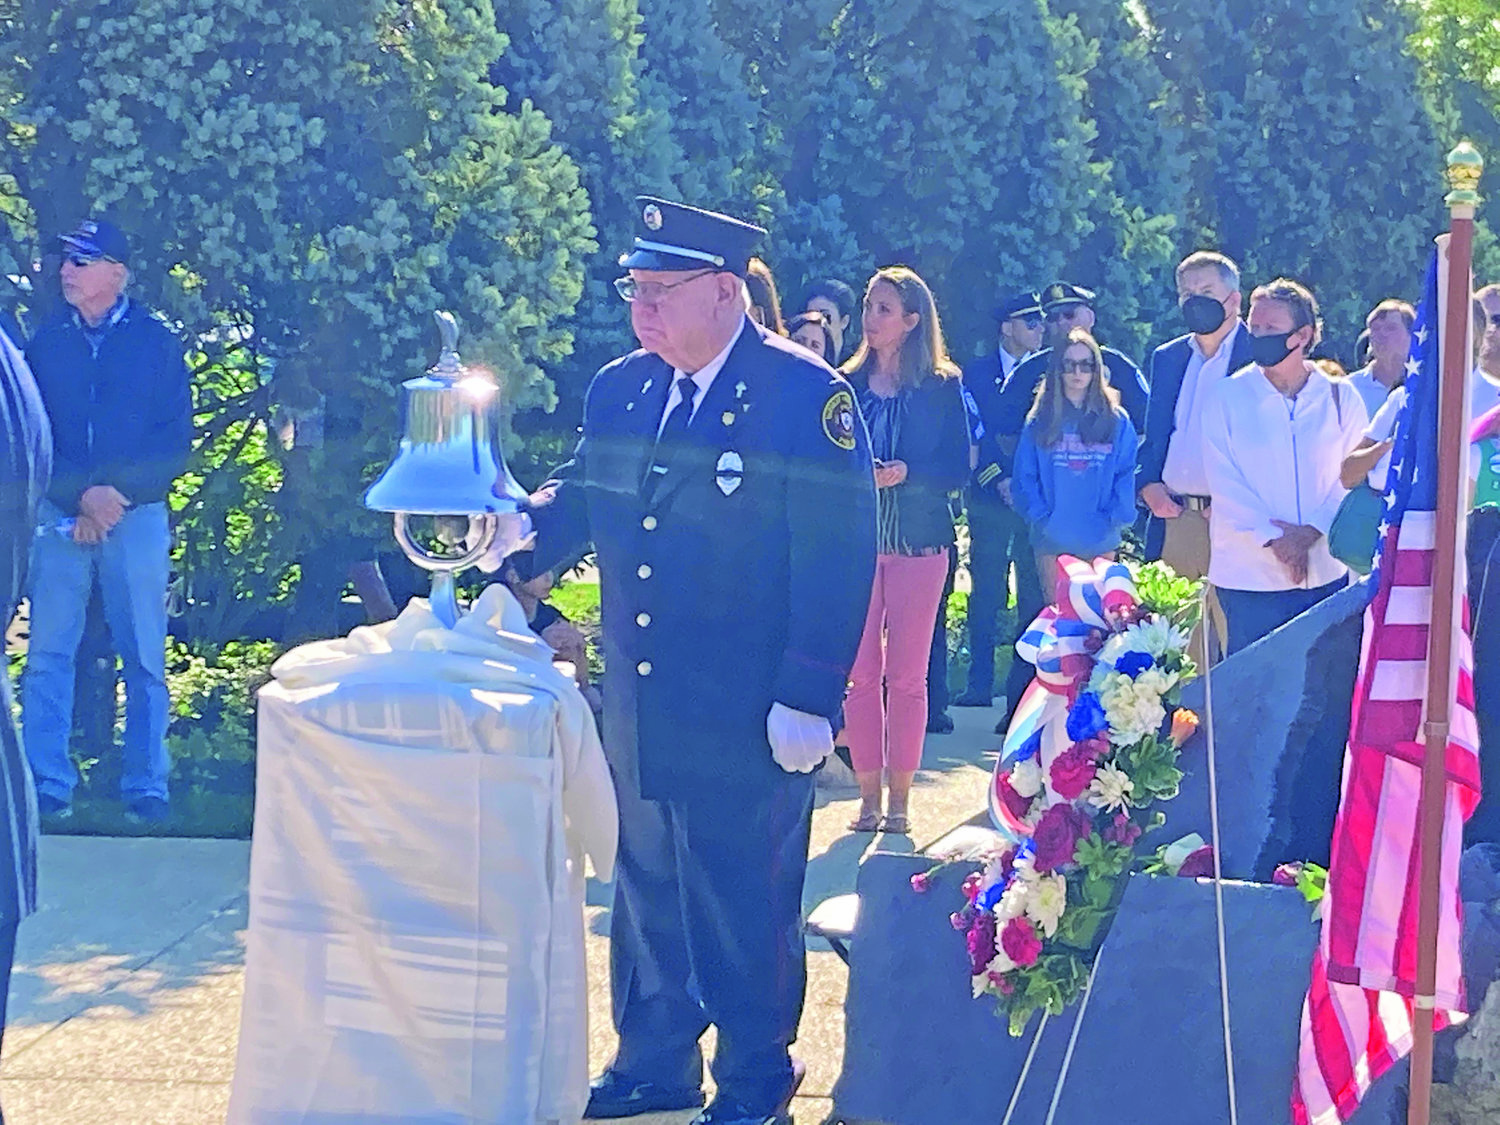 Navy veteran and Yardley-Makefield Fire Company member Lawrence Schwalm rings a bell at a morning ceremony in Lower Makefield Saturday marking 20 years since the Sept. 11, 2001 terrorist attacks.